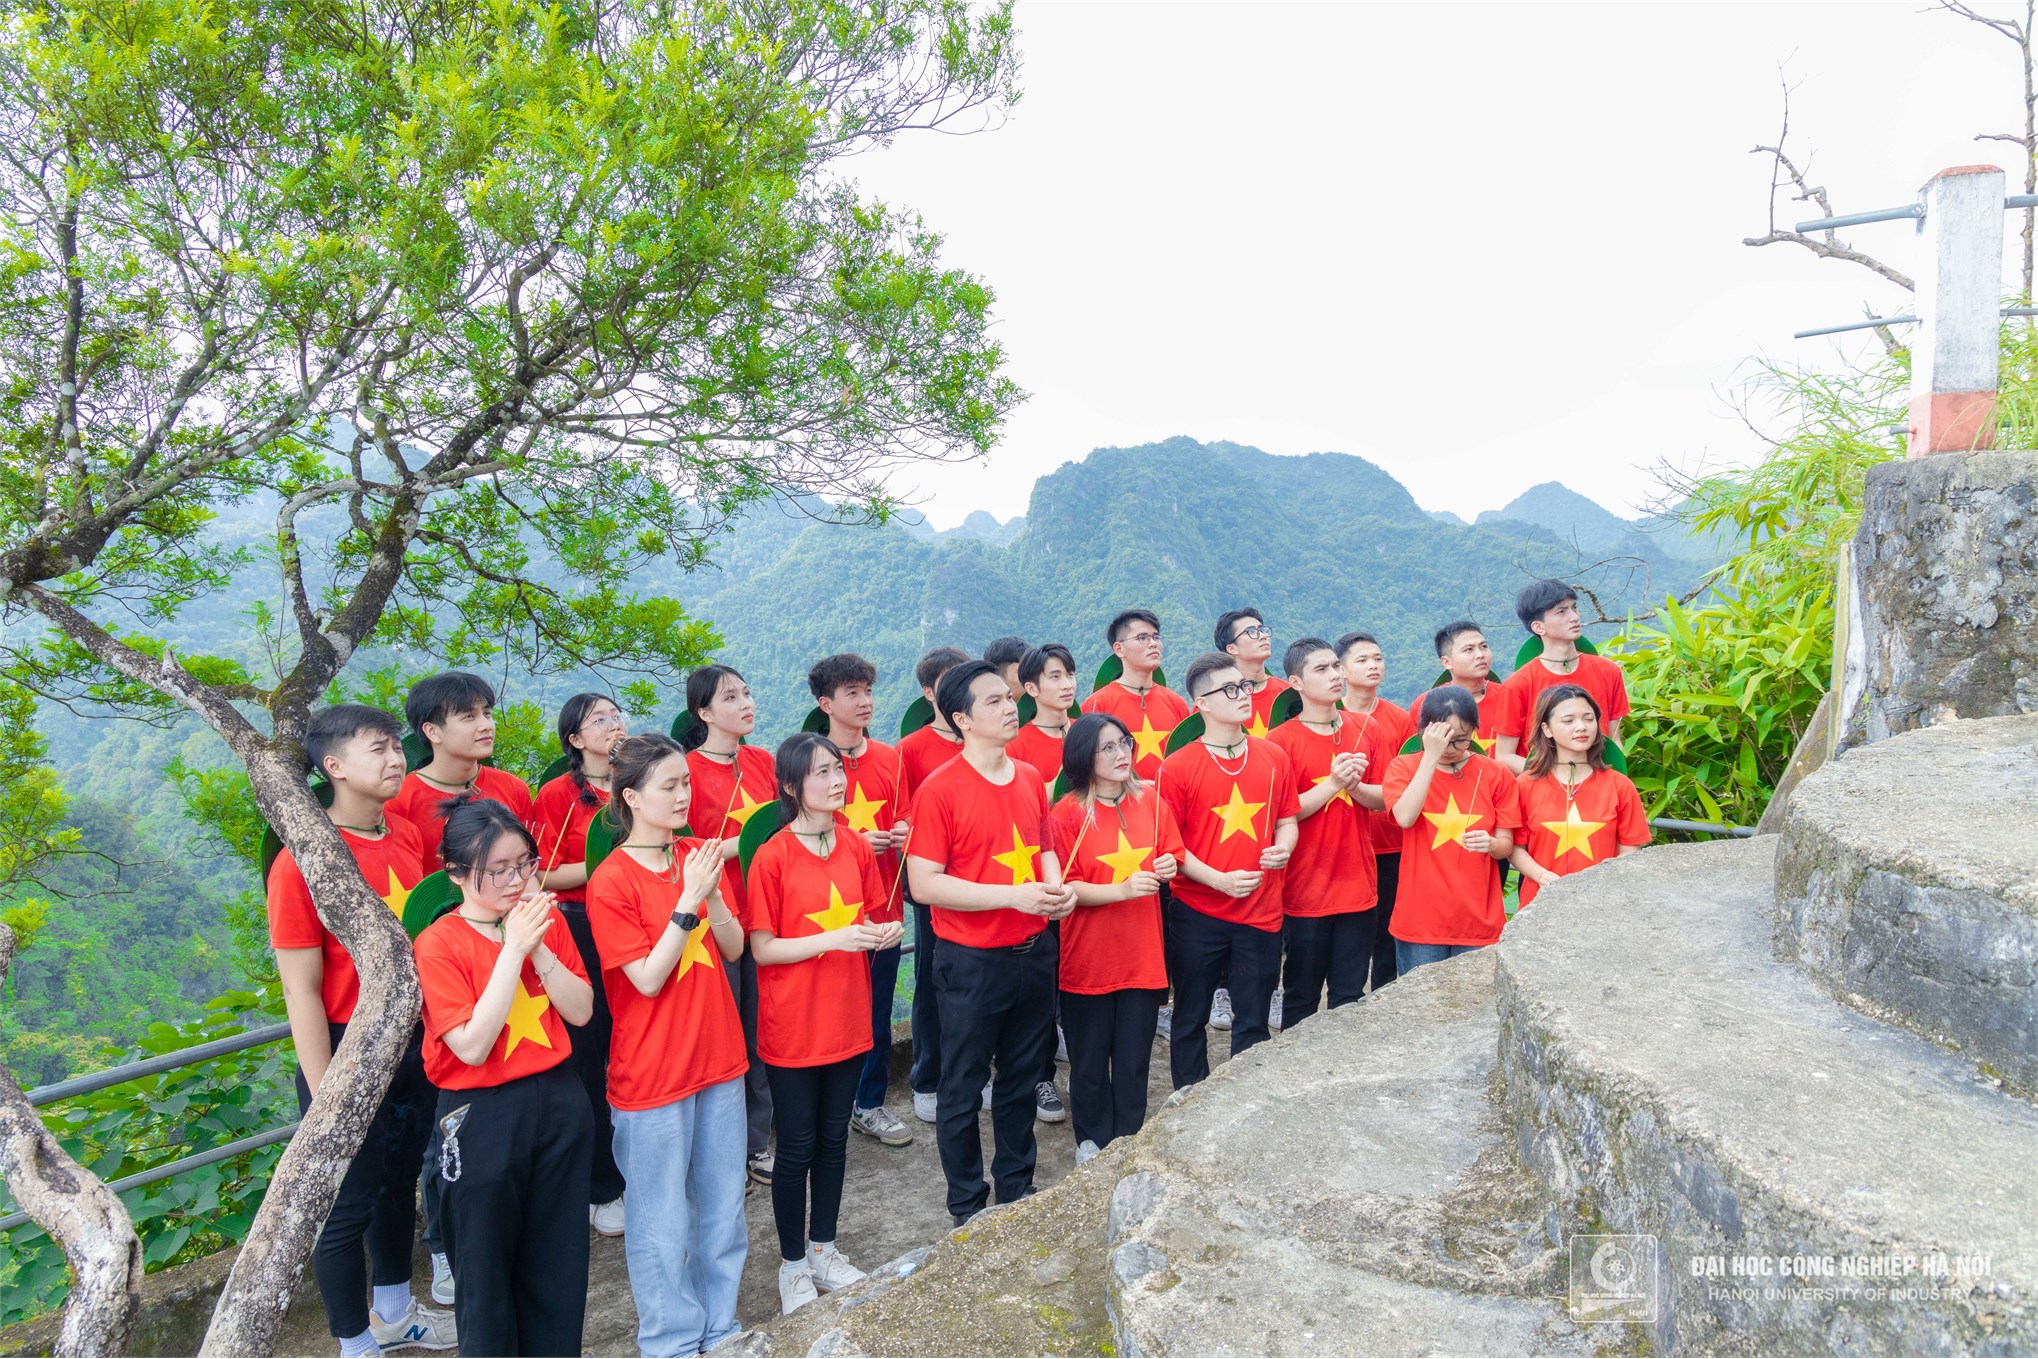 The Journey of Advanced HaUI Youth Following President Ho Chi Minh’s Will